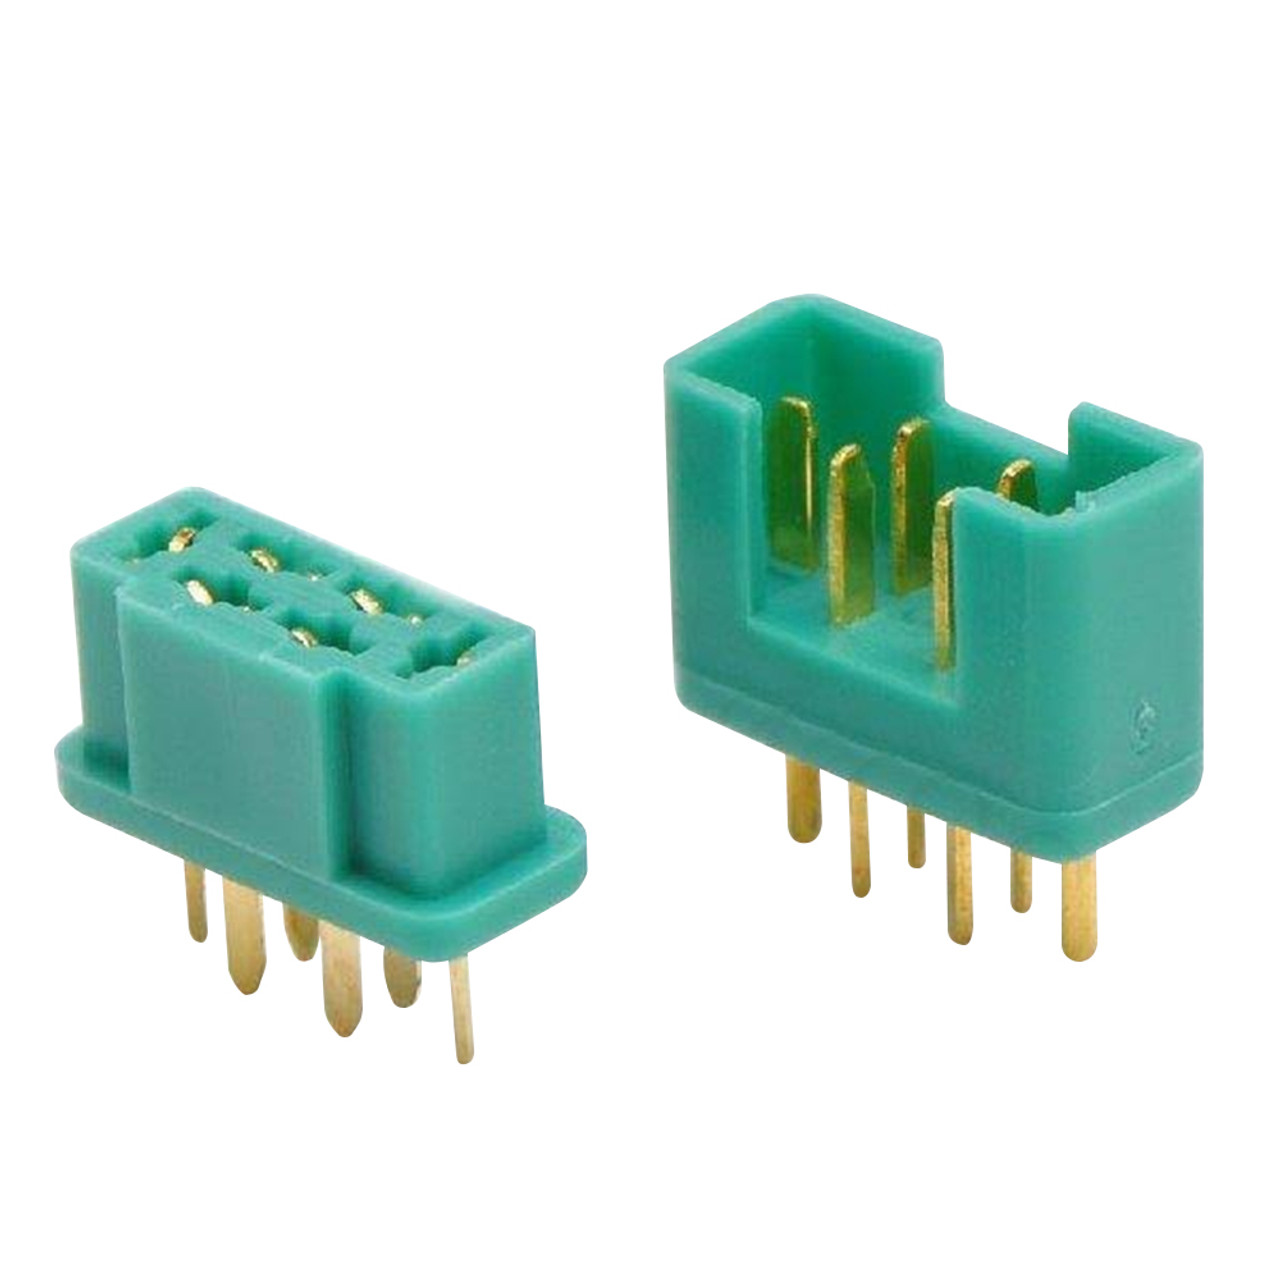 MPX 6 Pin Multiplex Connectors, One pair (includes one male and one female connector)